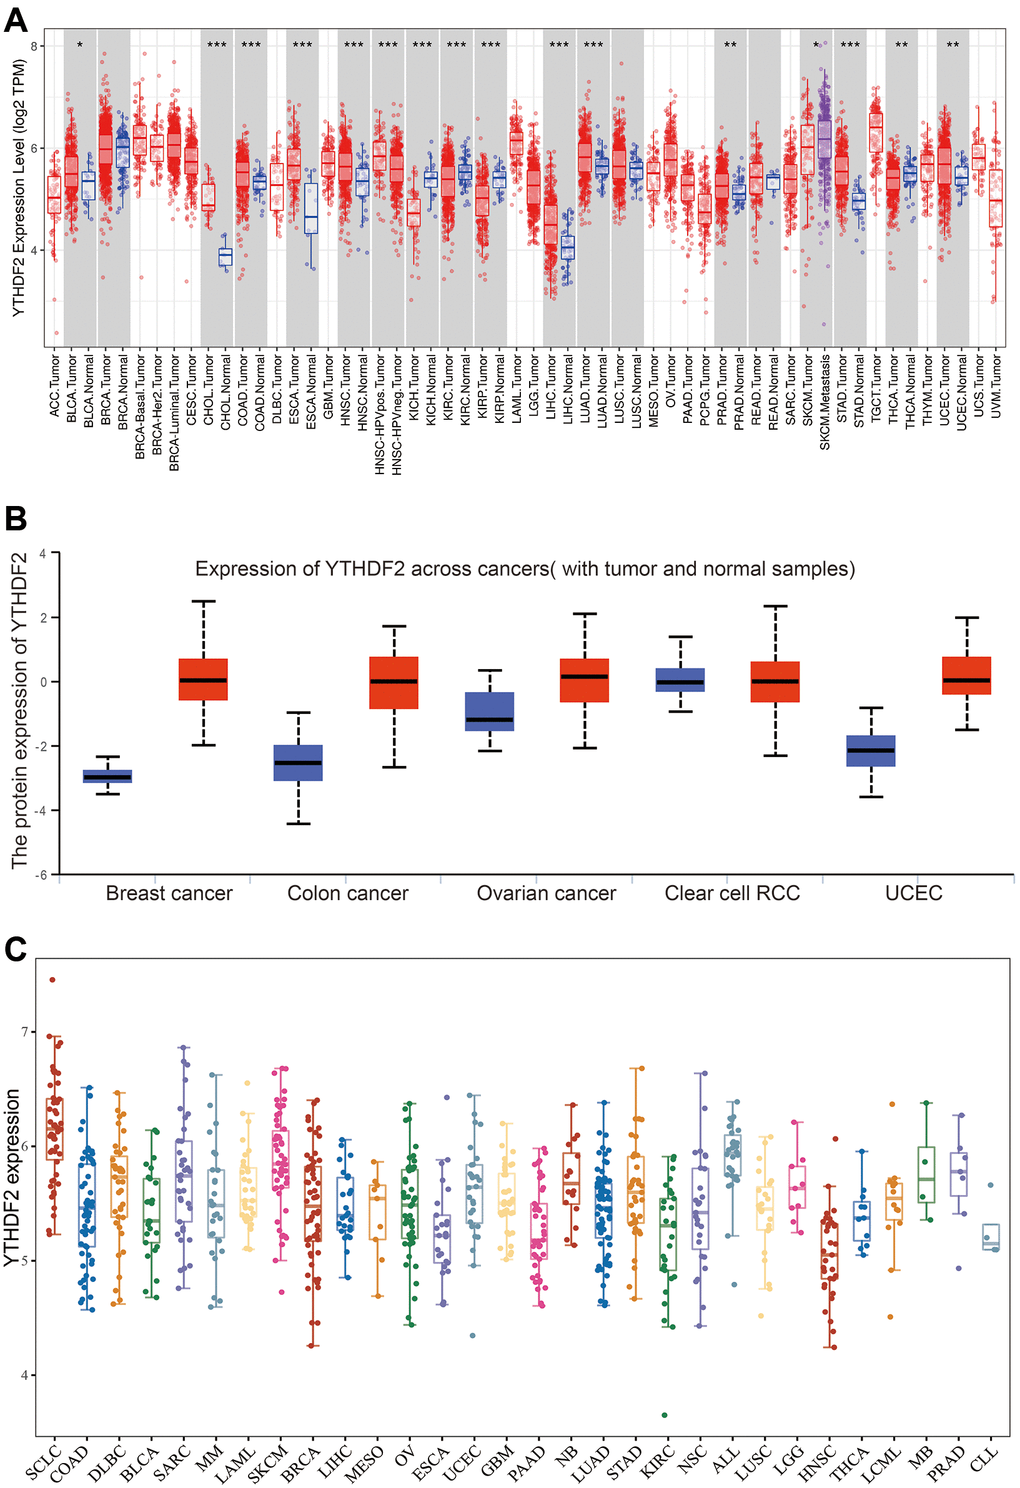 The expression of YTHDF2 in human cancer. (A) The expression of YTHDF2 in pan-cancer examine by TIMER database. (B) The protein level of YTHDF2 in diverse cancer examine by the UALCAN database. (C) The expression of YTHDF2 in diverse cancer cell lines examined by CCLE database.